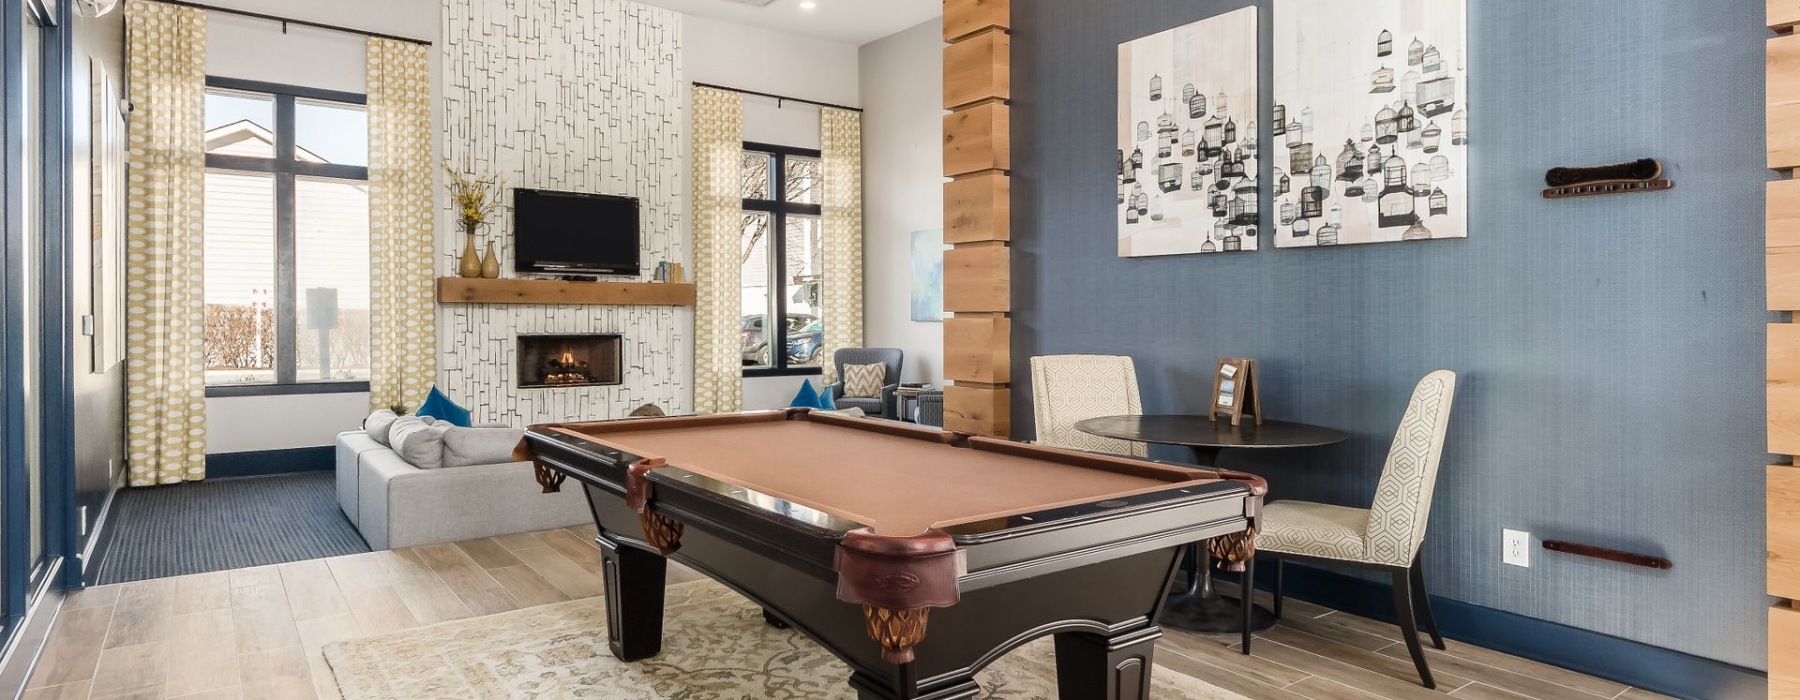 Pool table in apartment clubhouse